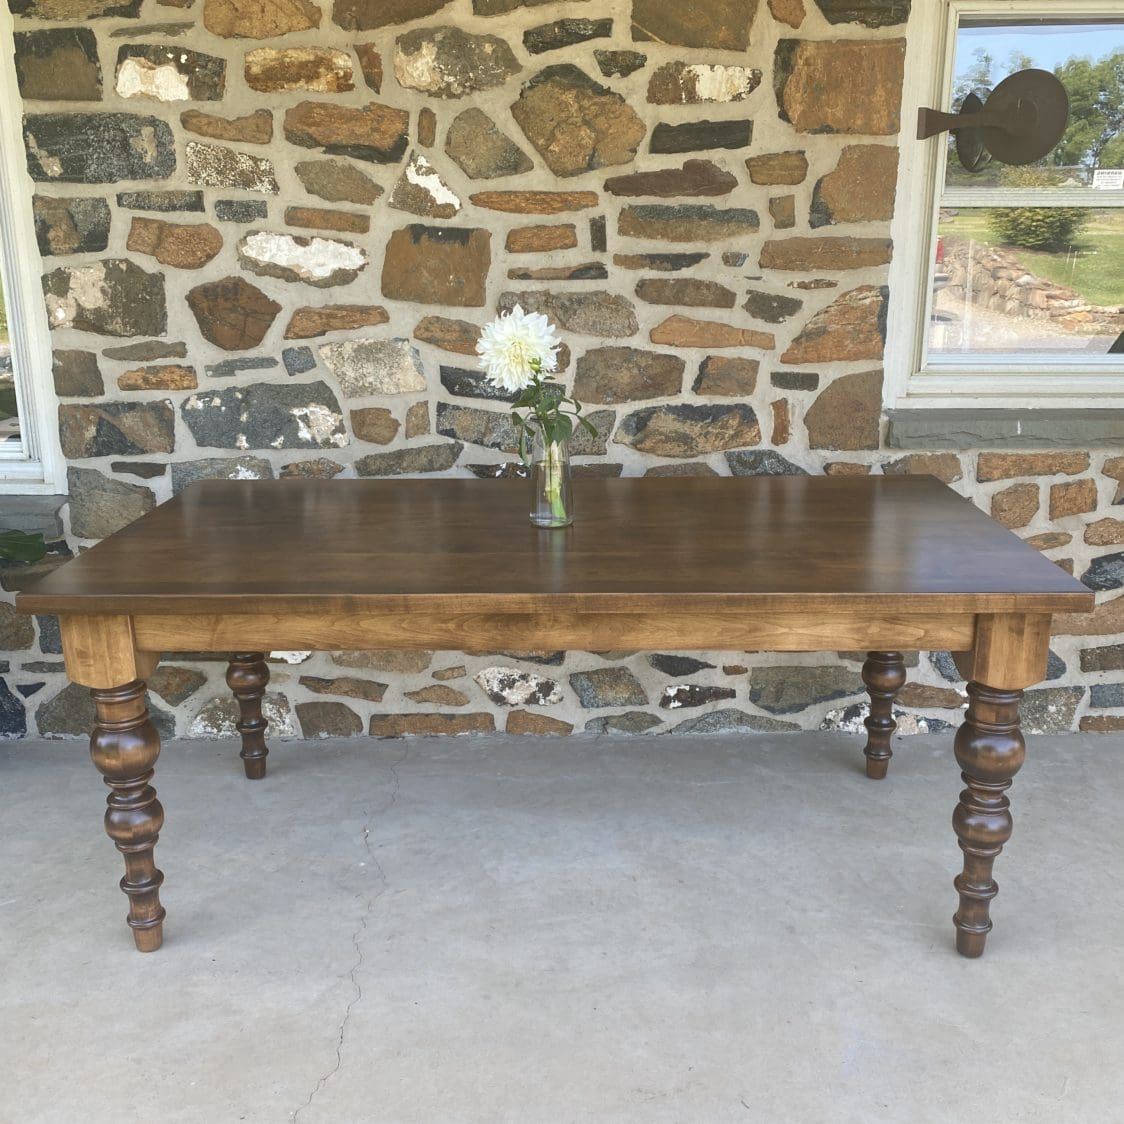 This table will really make a statement with it's beautiful turned legs.